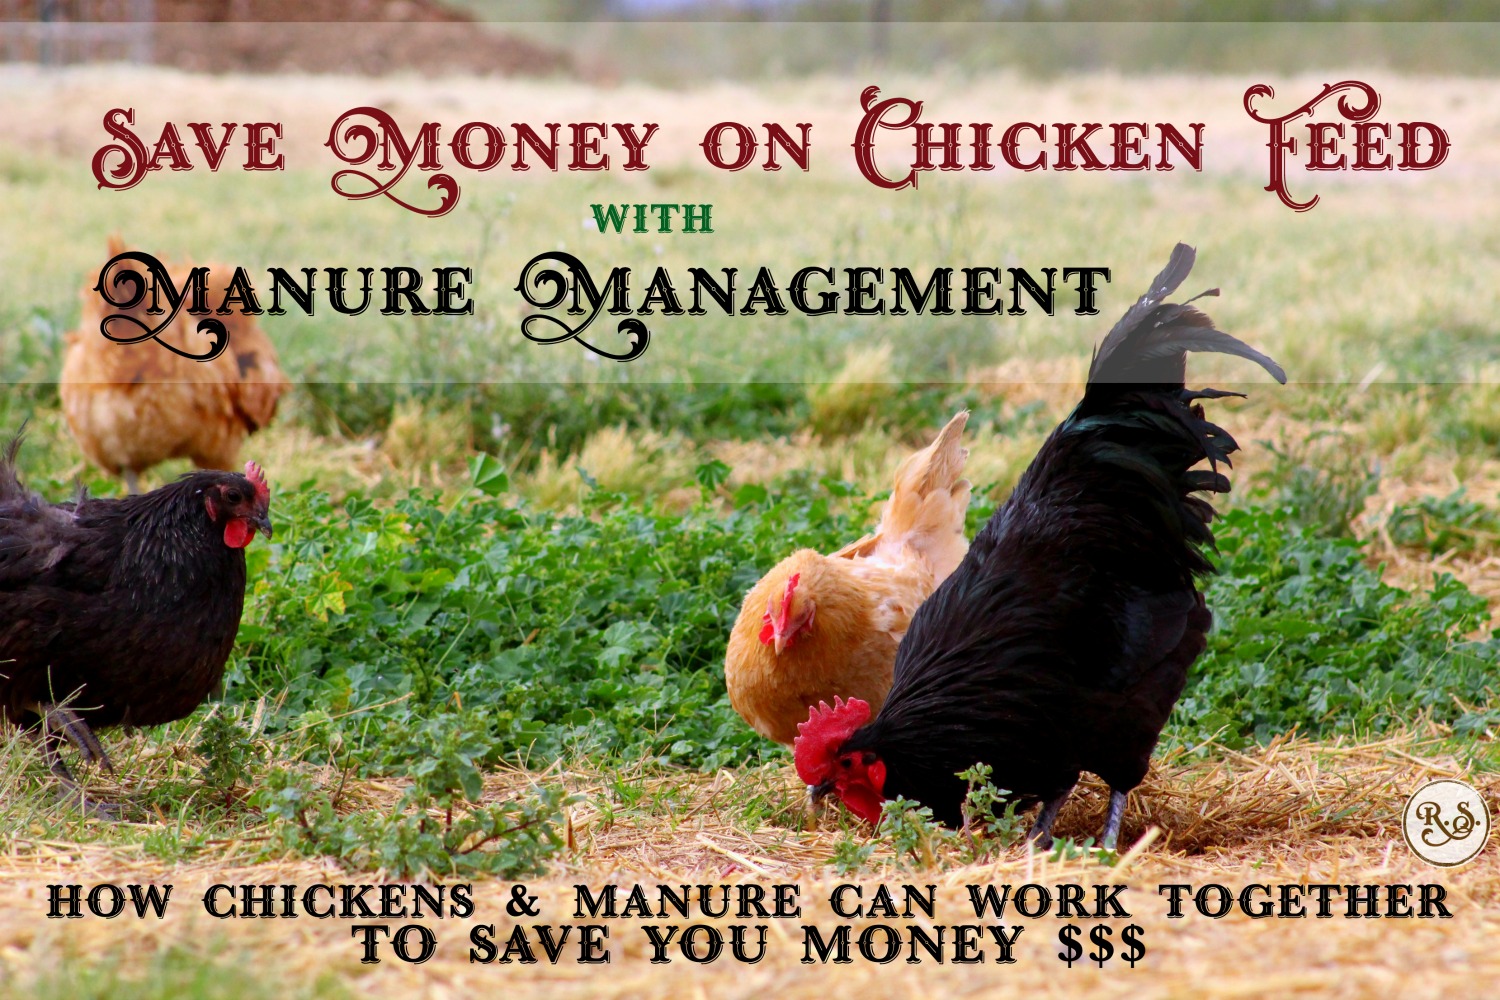 Save money on chicken feed with these easy manure management tips. Free food for the chickens--bugs, compost, worms, etc, ready for you to utilize. Health-promoting & easy DIY ideas for your backyard.